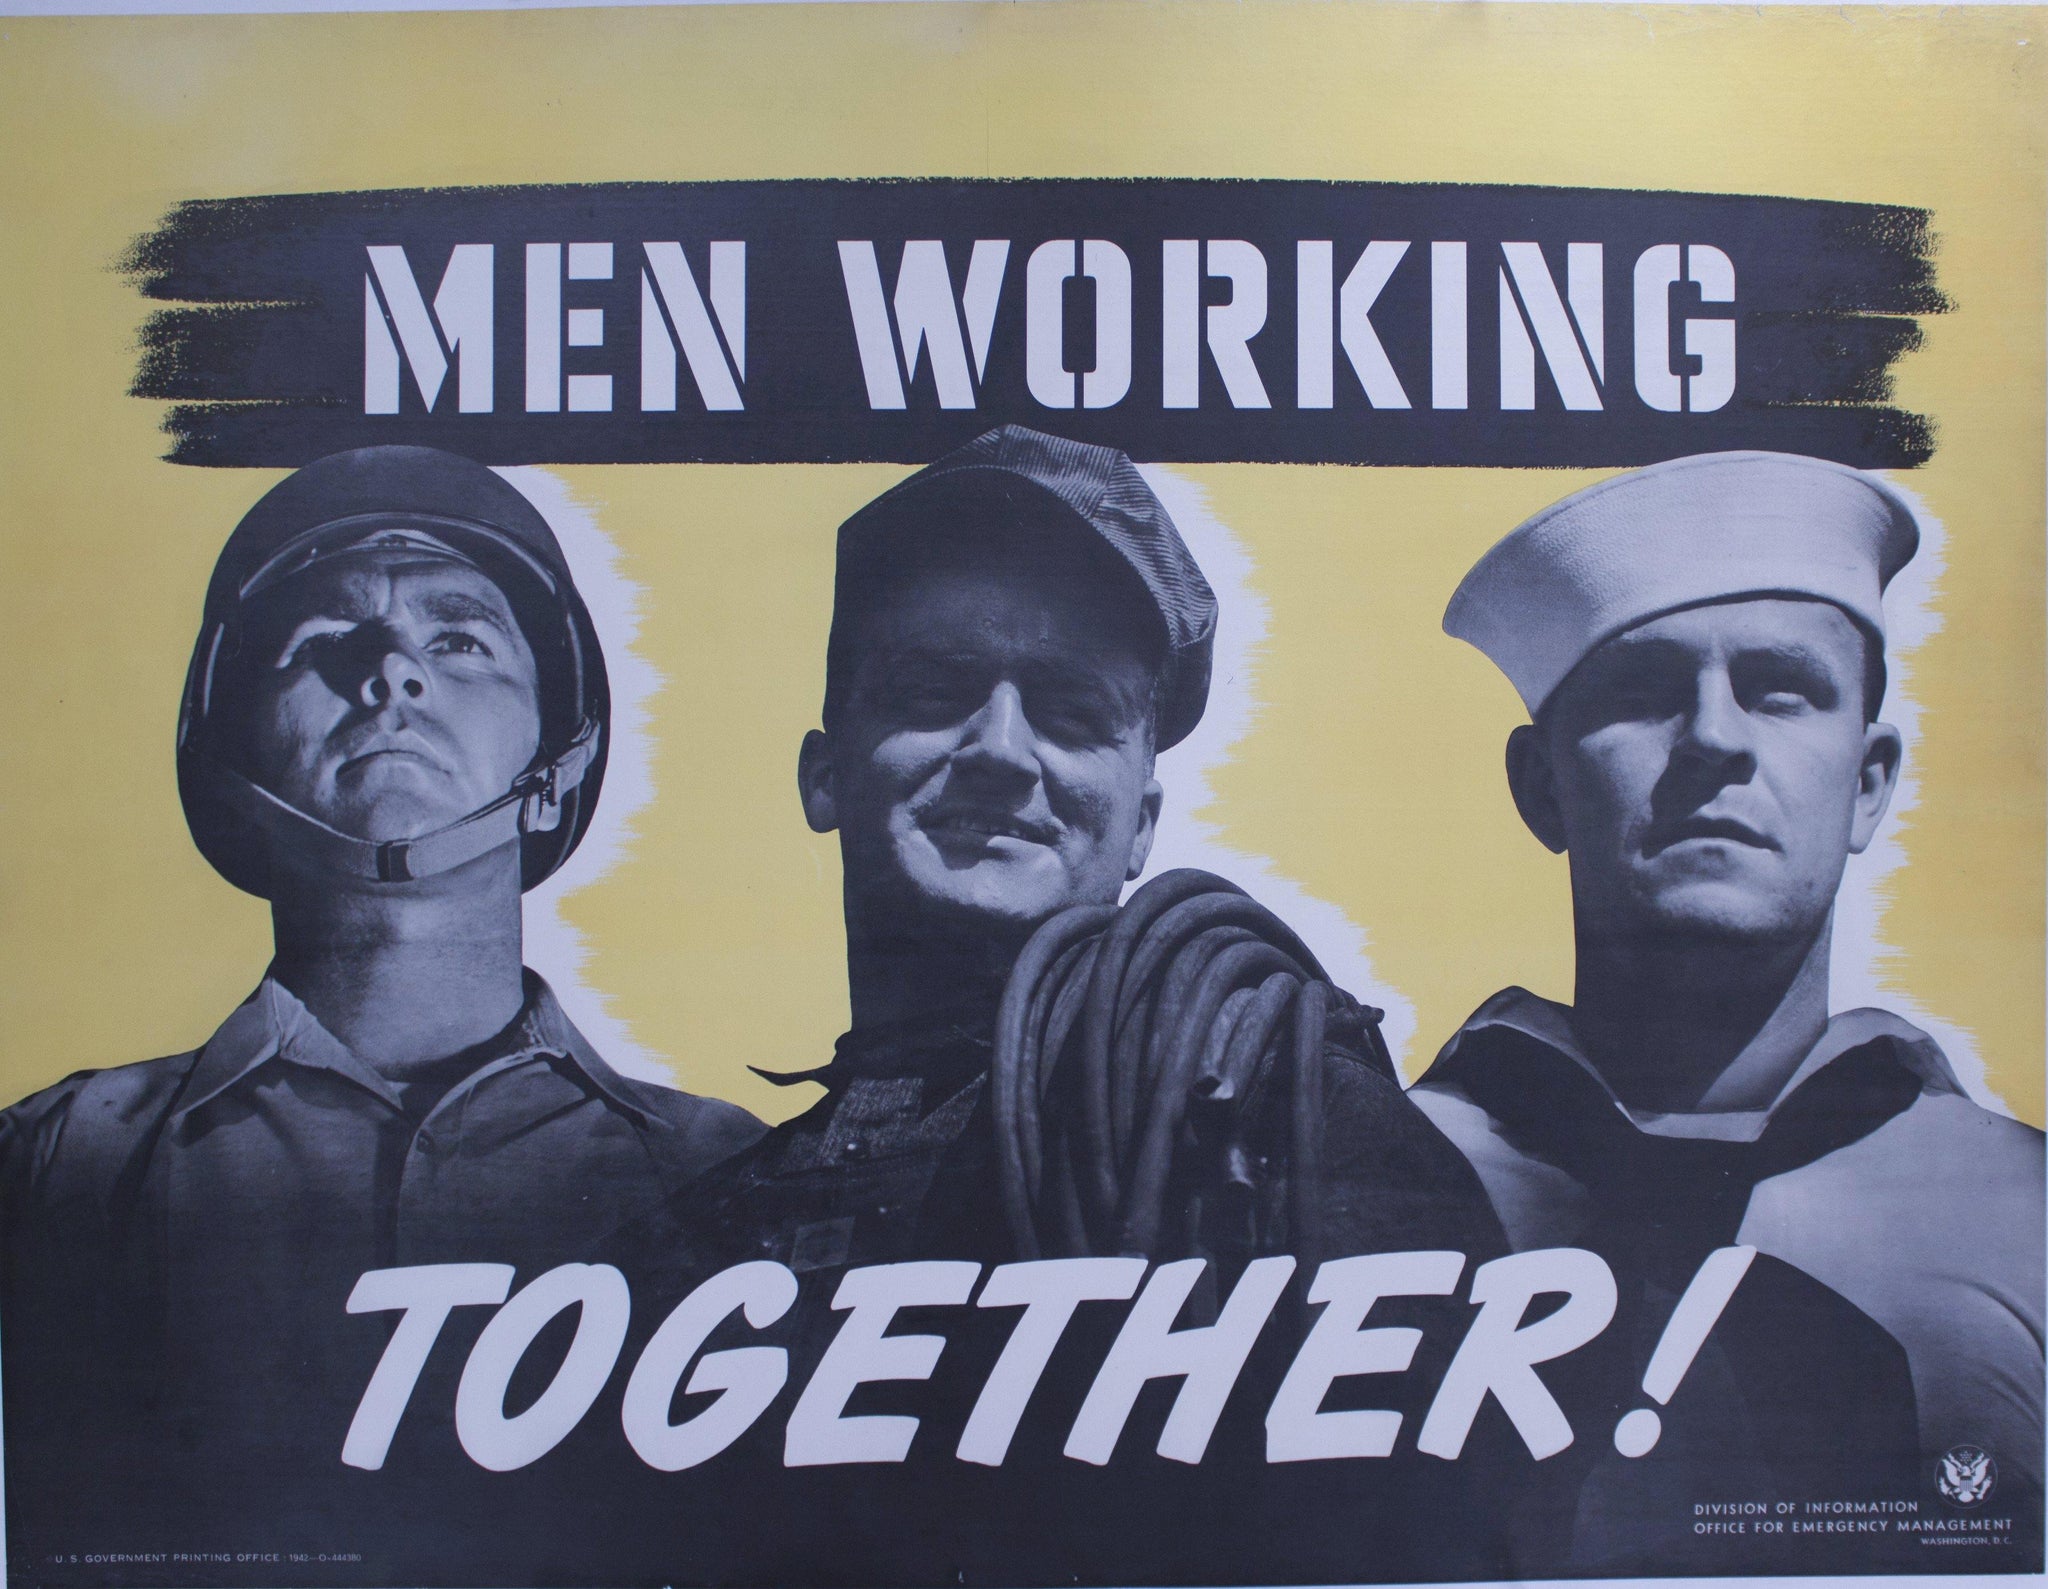 1942 Men Working Together! by Alfred Palmer - Golden Age Posters